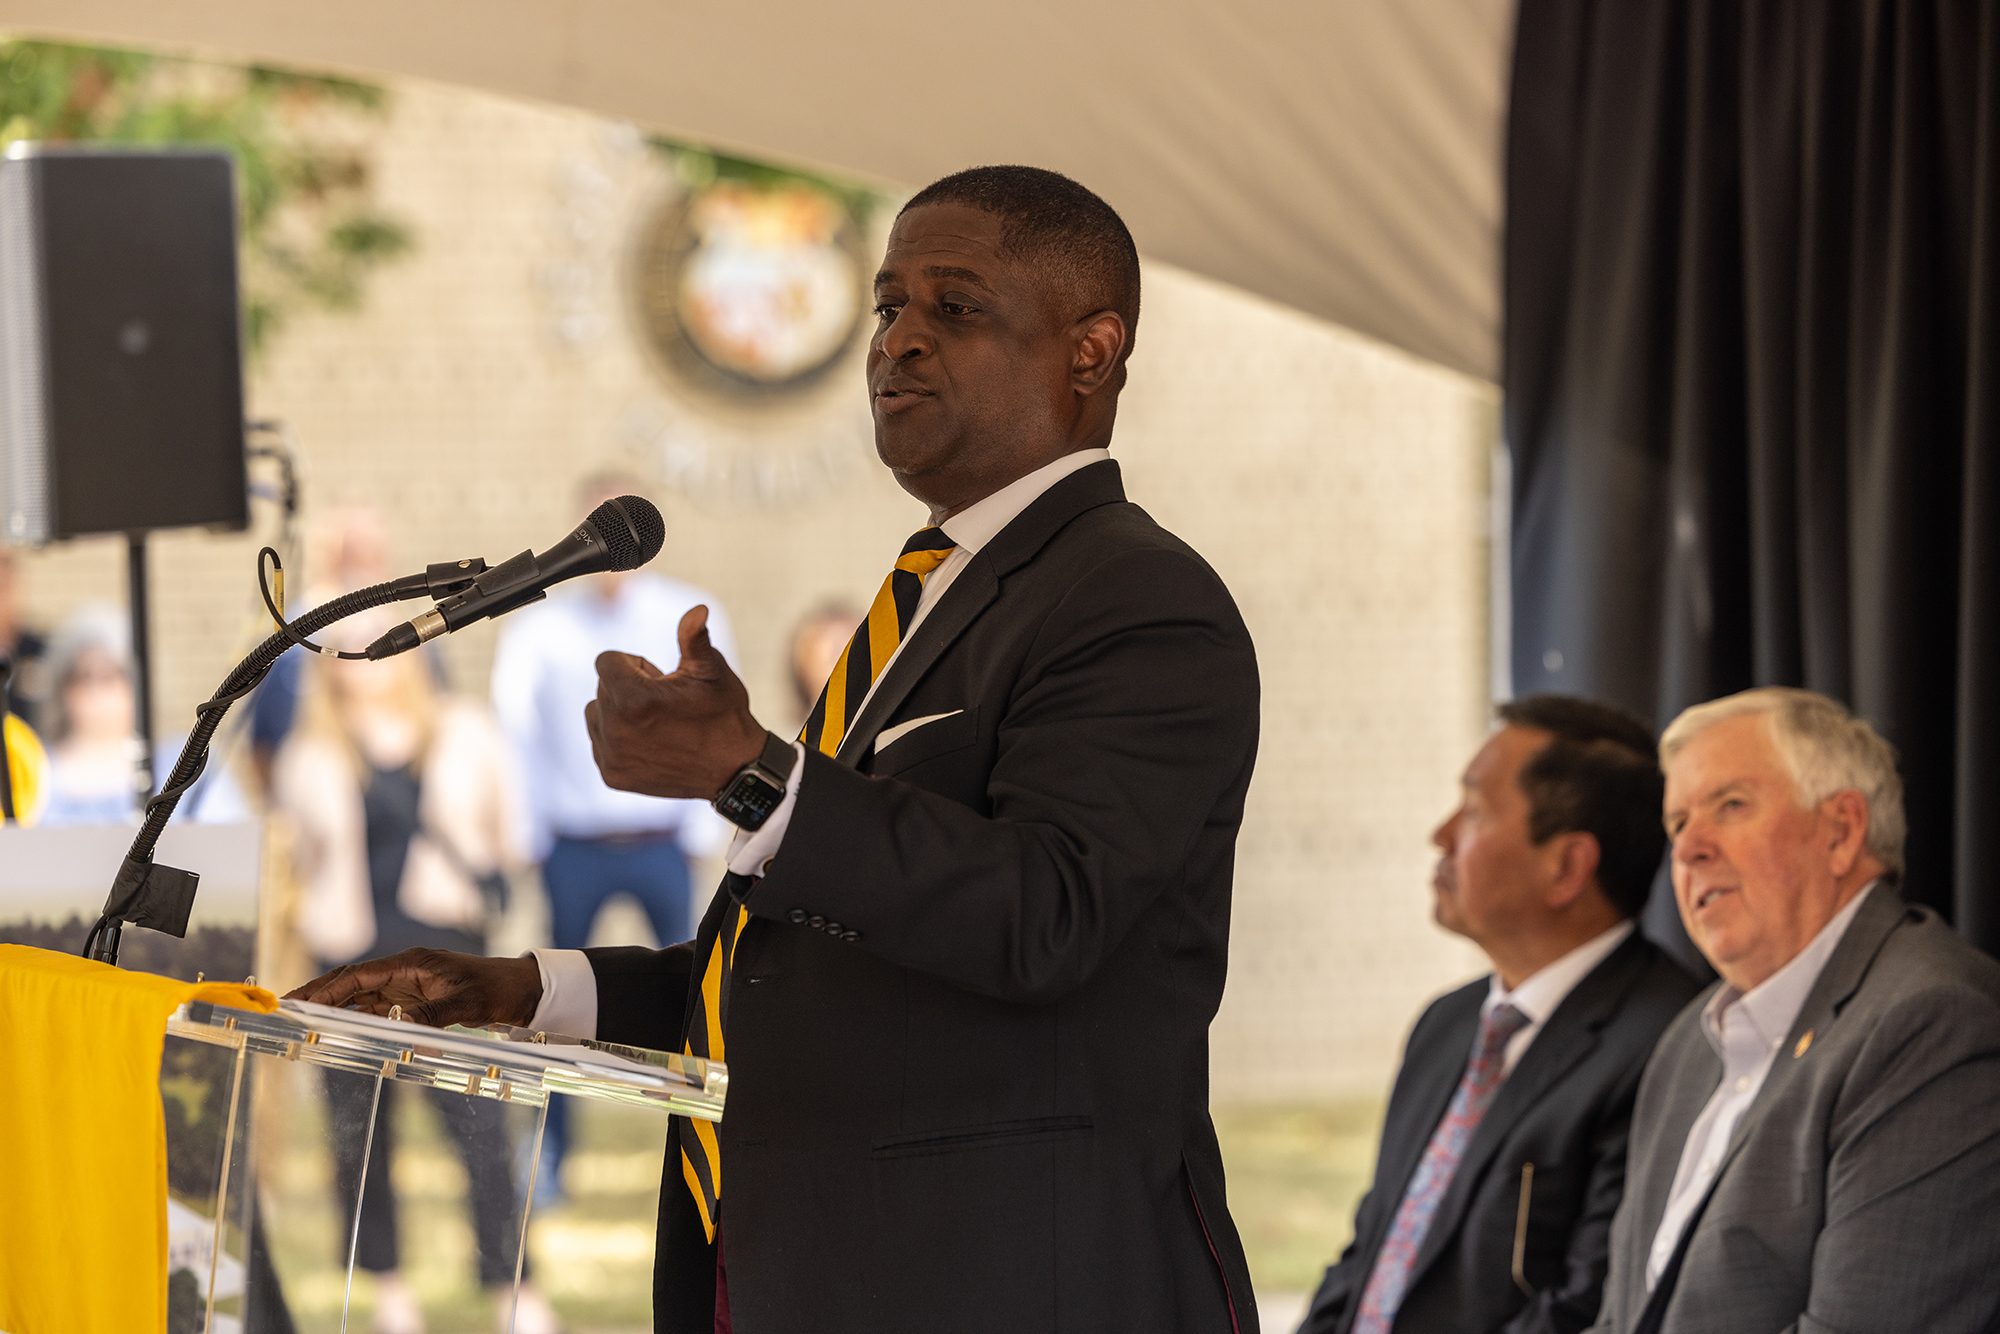 Michael Williams, chair of the UM Board of Curators, at the groundbreaking ceremony for MURR West.